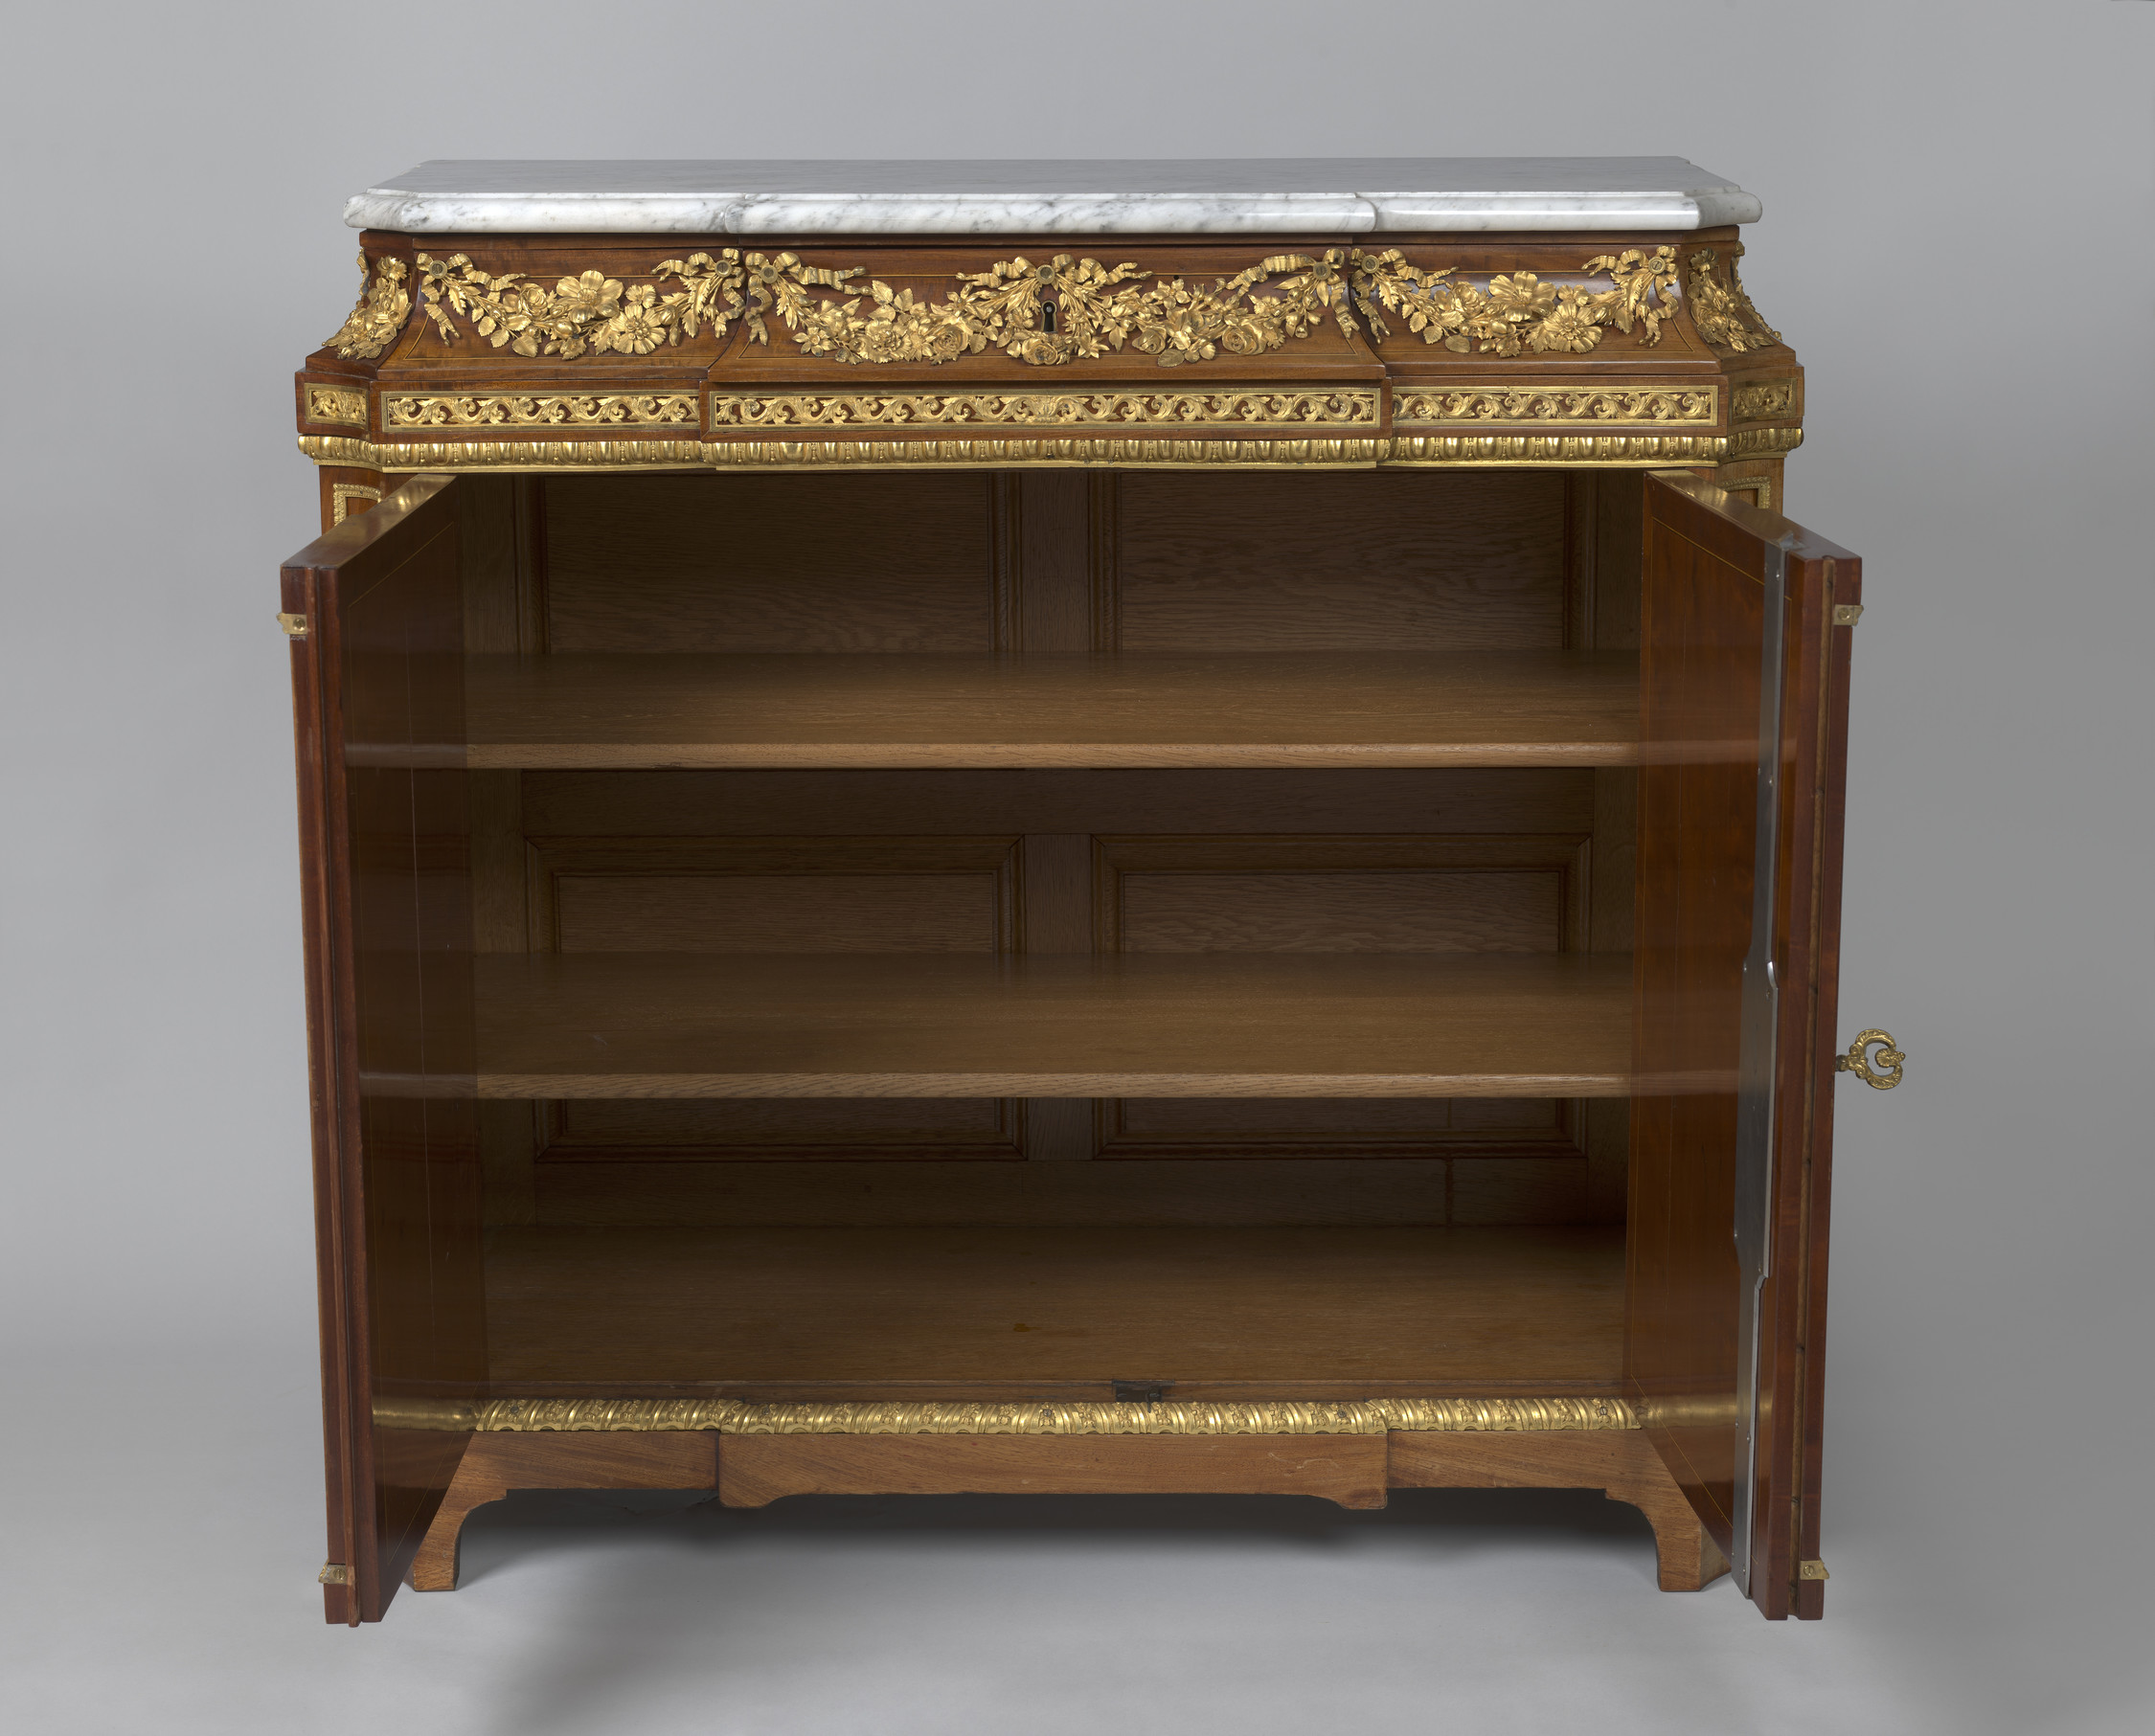 Rectangular cabinet veneered in mahogany with white marble top and gilt bronze mounts. The concave frieze above two doors with gilt bronze mounts of garlands of flowers, the door&nbsp;panels edged with gilt&nbsp;bronze foliage mounts. The angles with cant